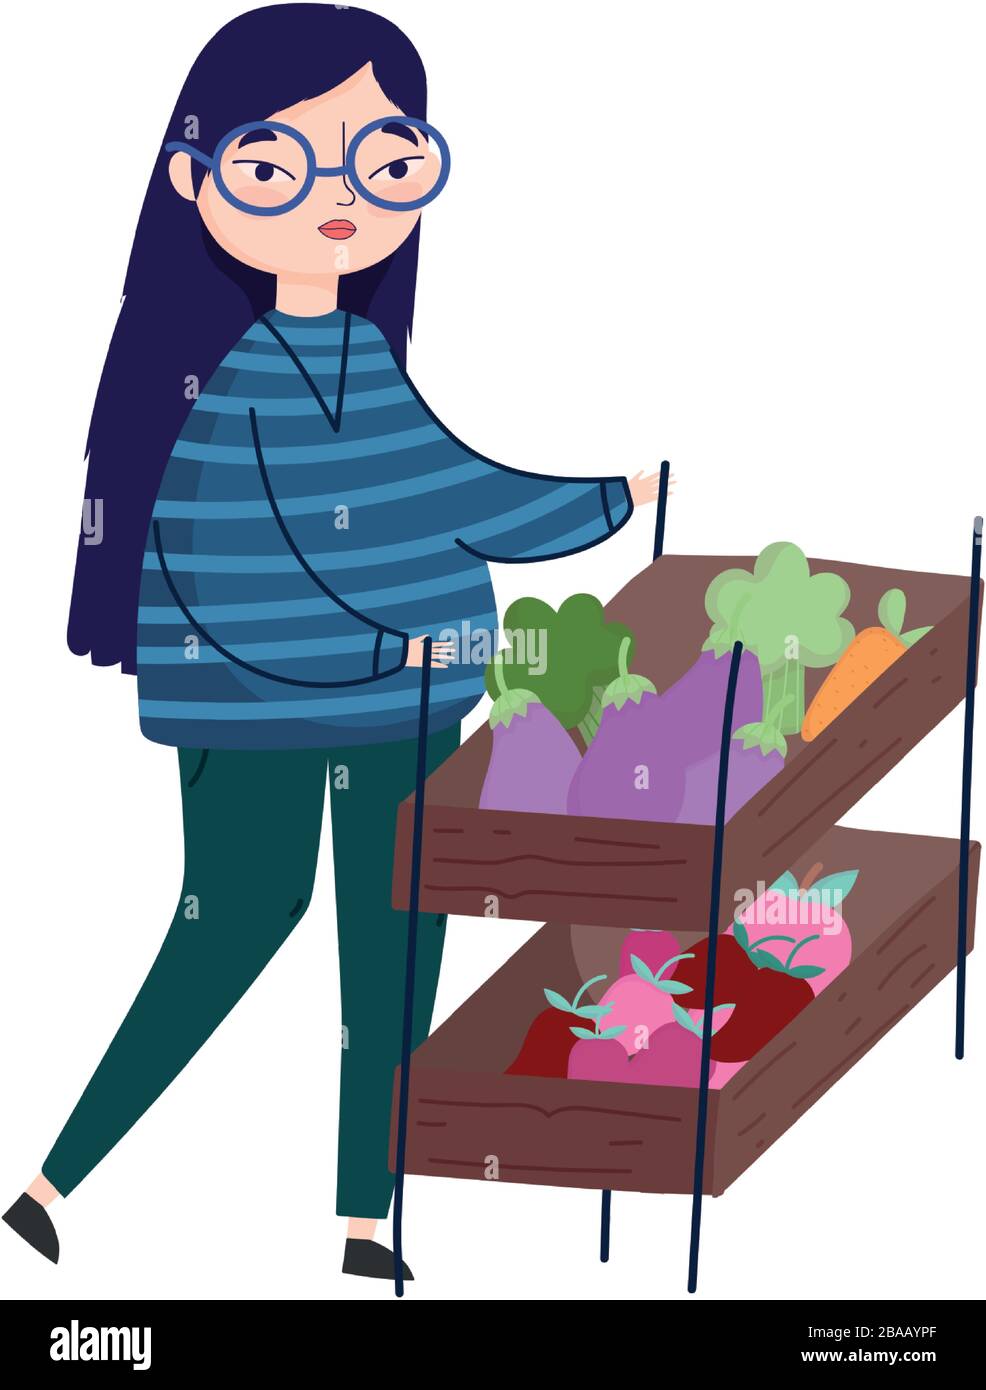 young woman with vegetables in shelf market isolated image vector illustration Stock Vector